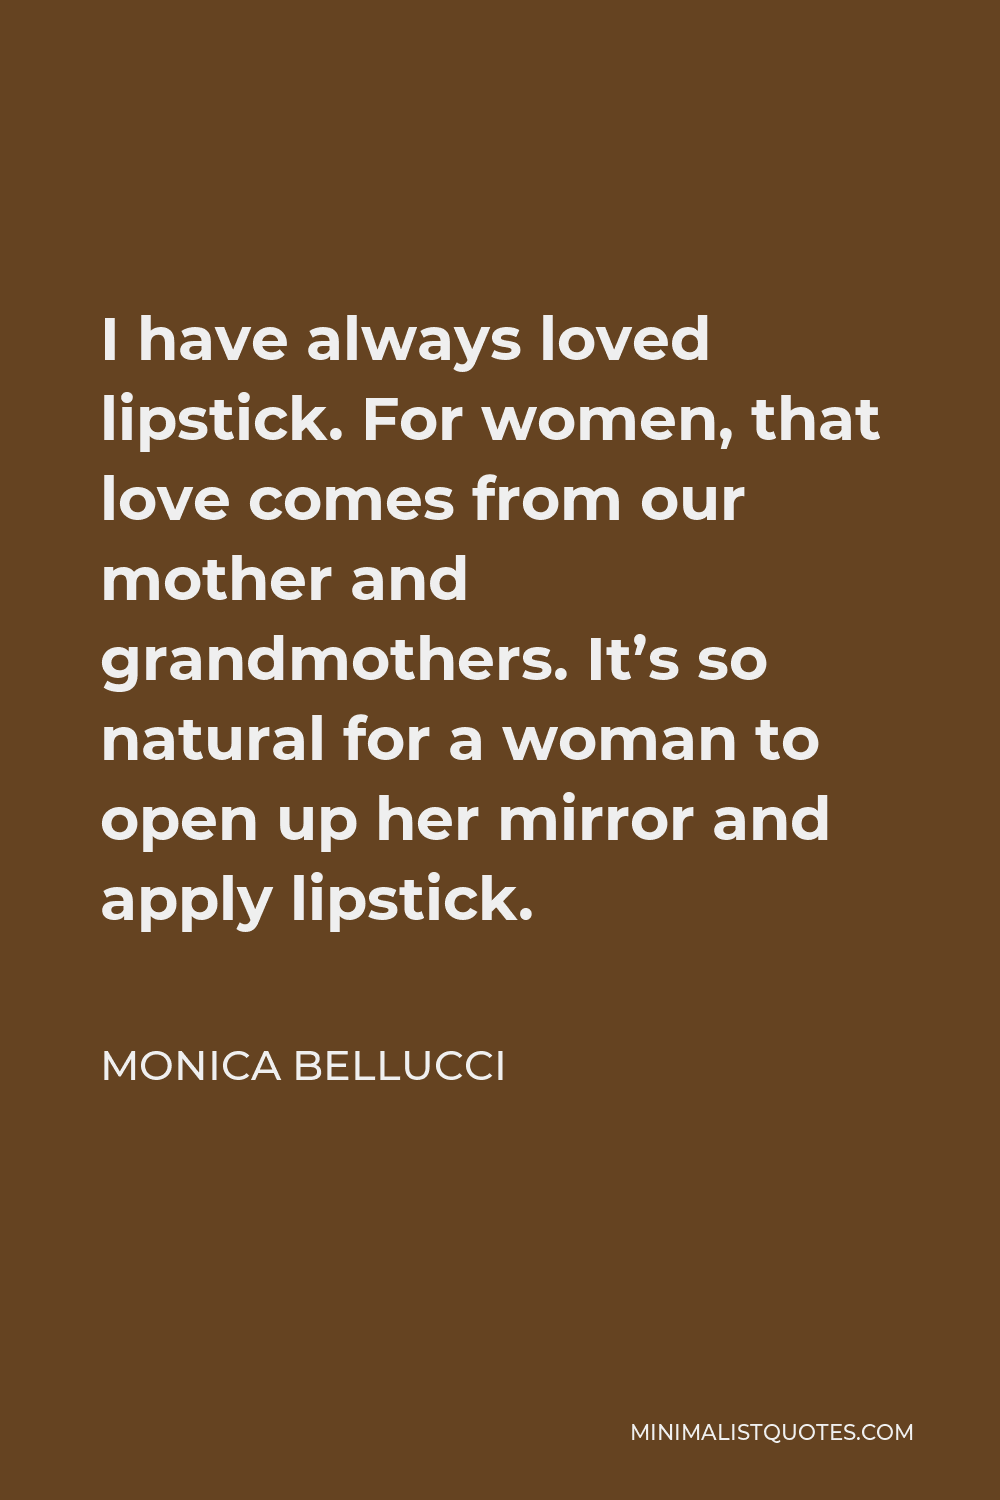 Monica Bellucci Quote - I have always loved lipstick. For women, that love comes from our mother and grandmothers. It’s so natural for a woman to open up her mirror and apply lipstick.